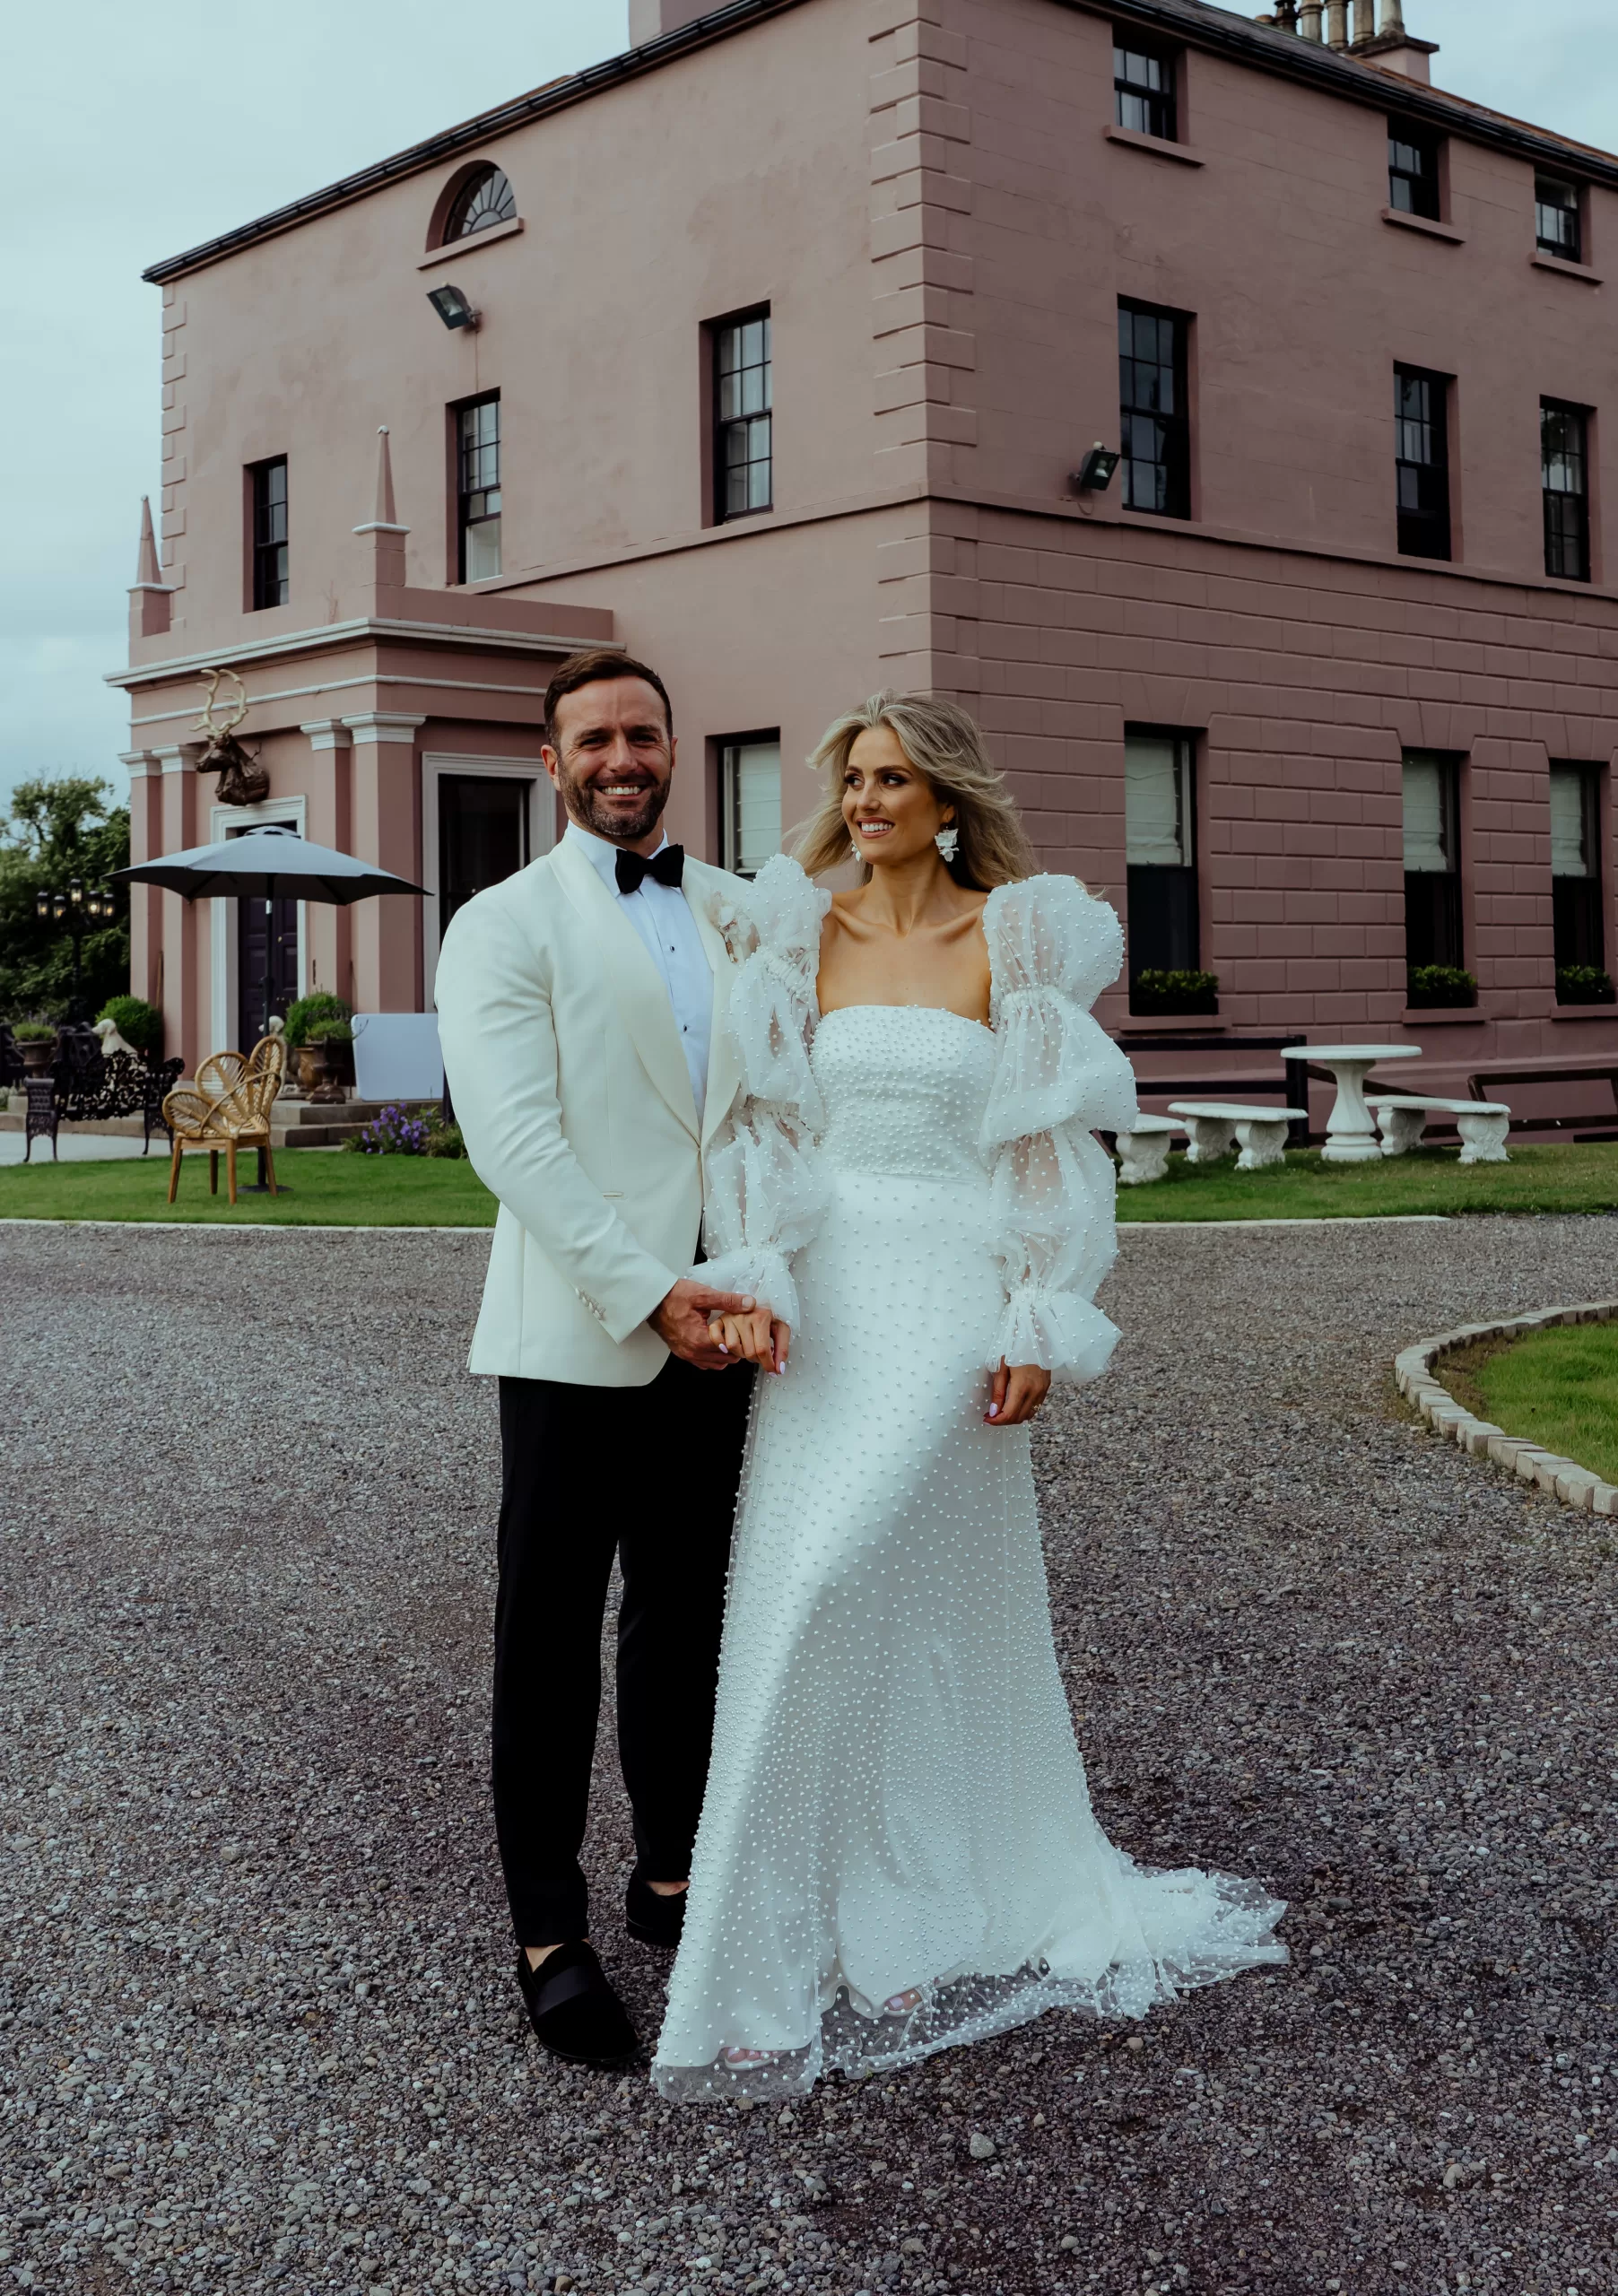 Dominique & Patrick Celebrate In Style | Wedding Journal